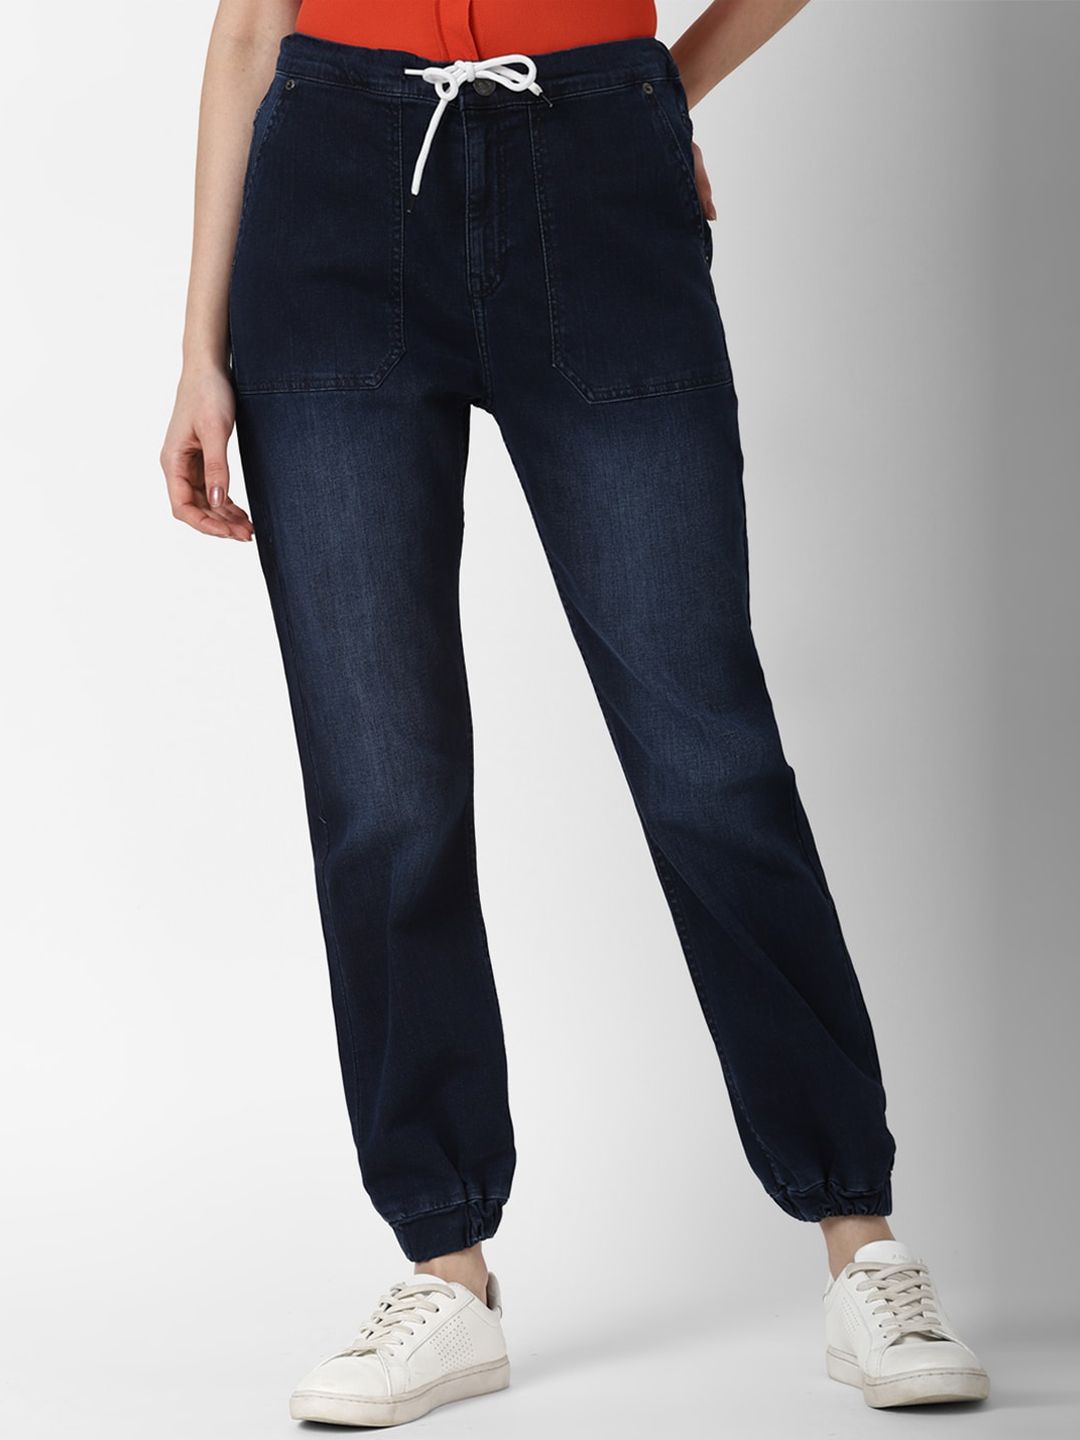 FOREVER 21 Women Navy Blue Light Fade Jeans Price in India